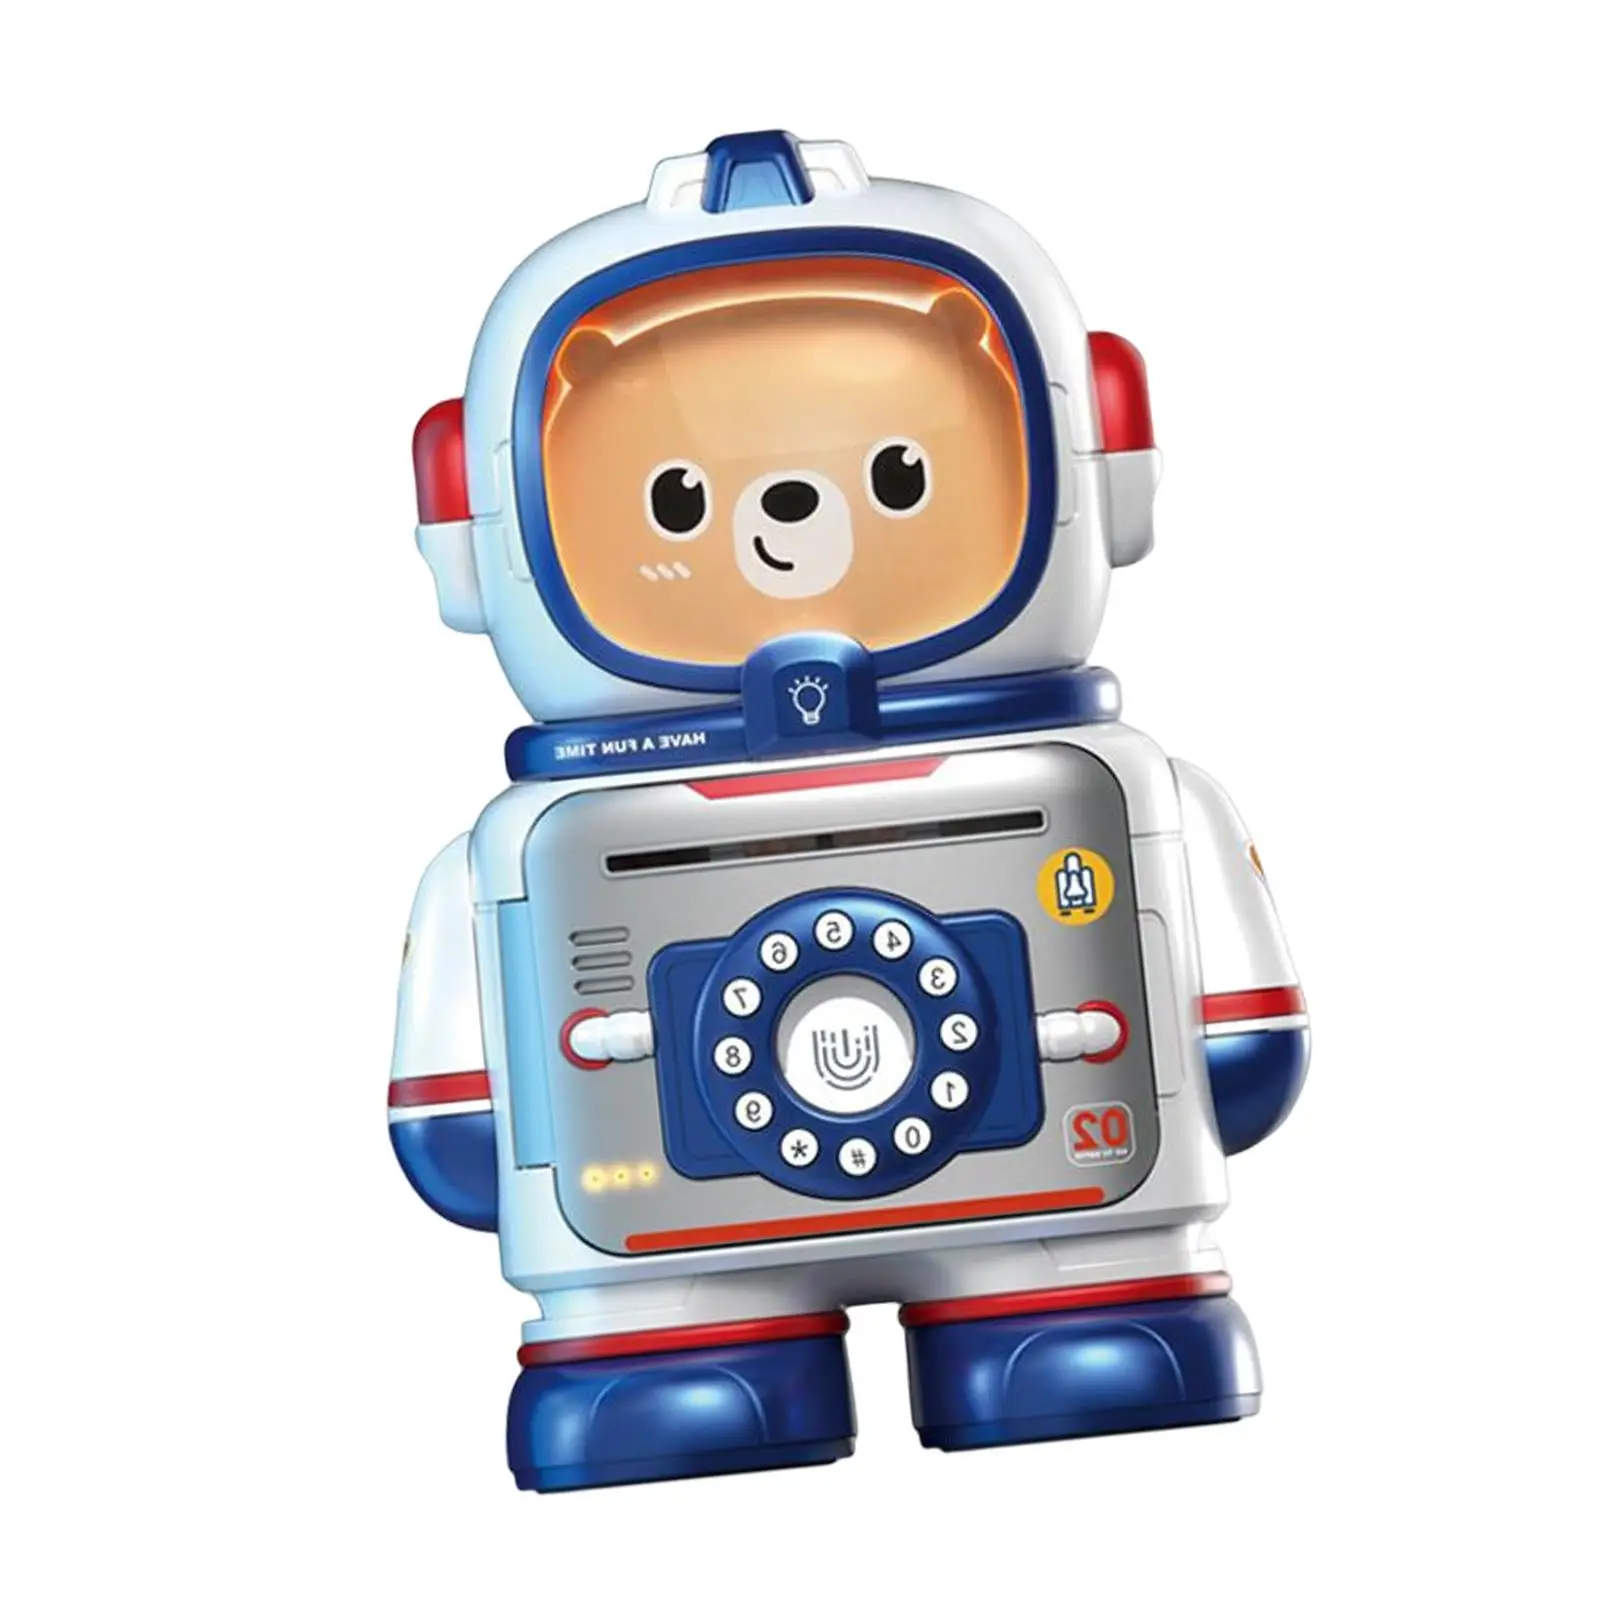 Astronaut Bear Piggy Bank Decoration Pretend Play Toys for Bedroom Living Room